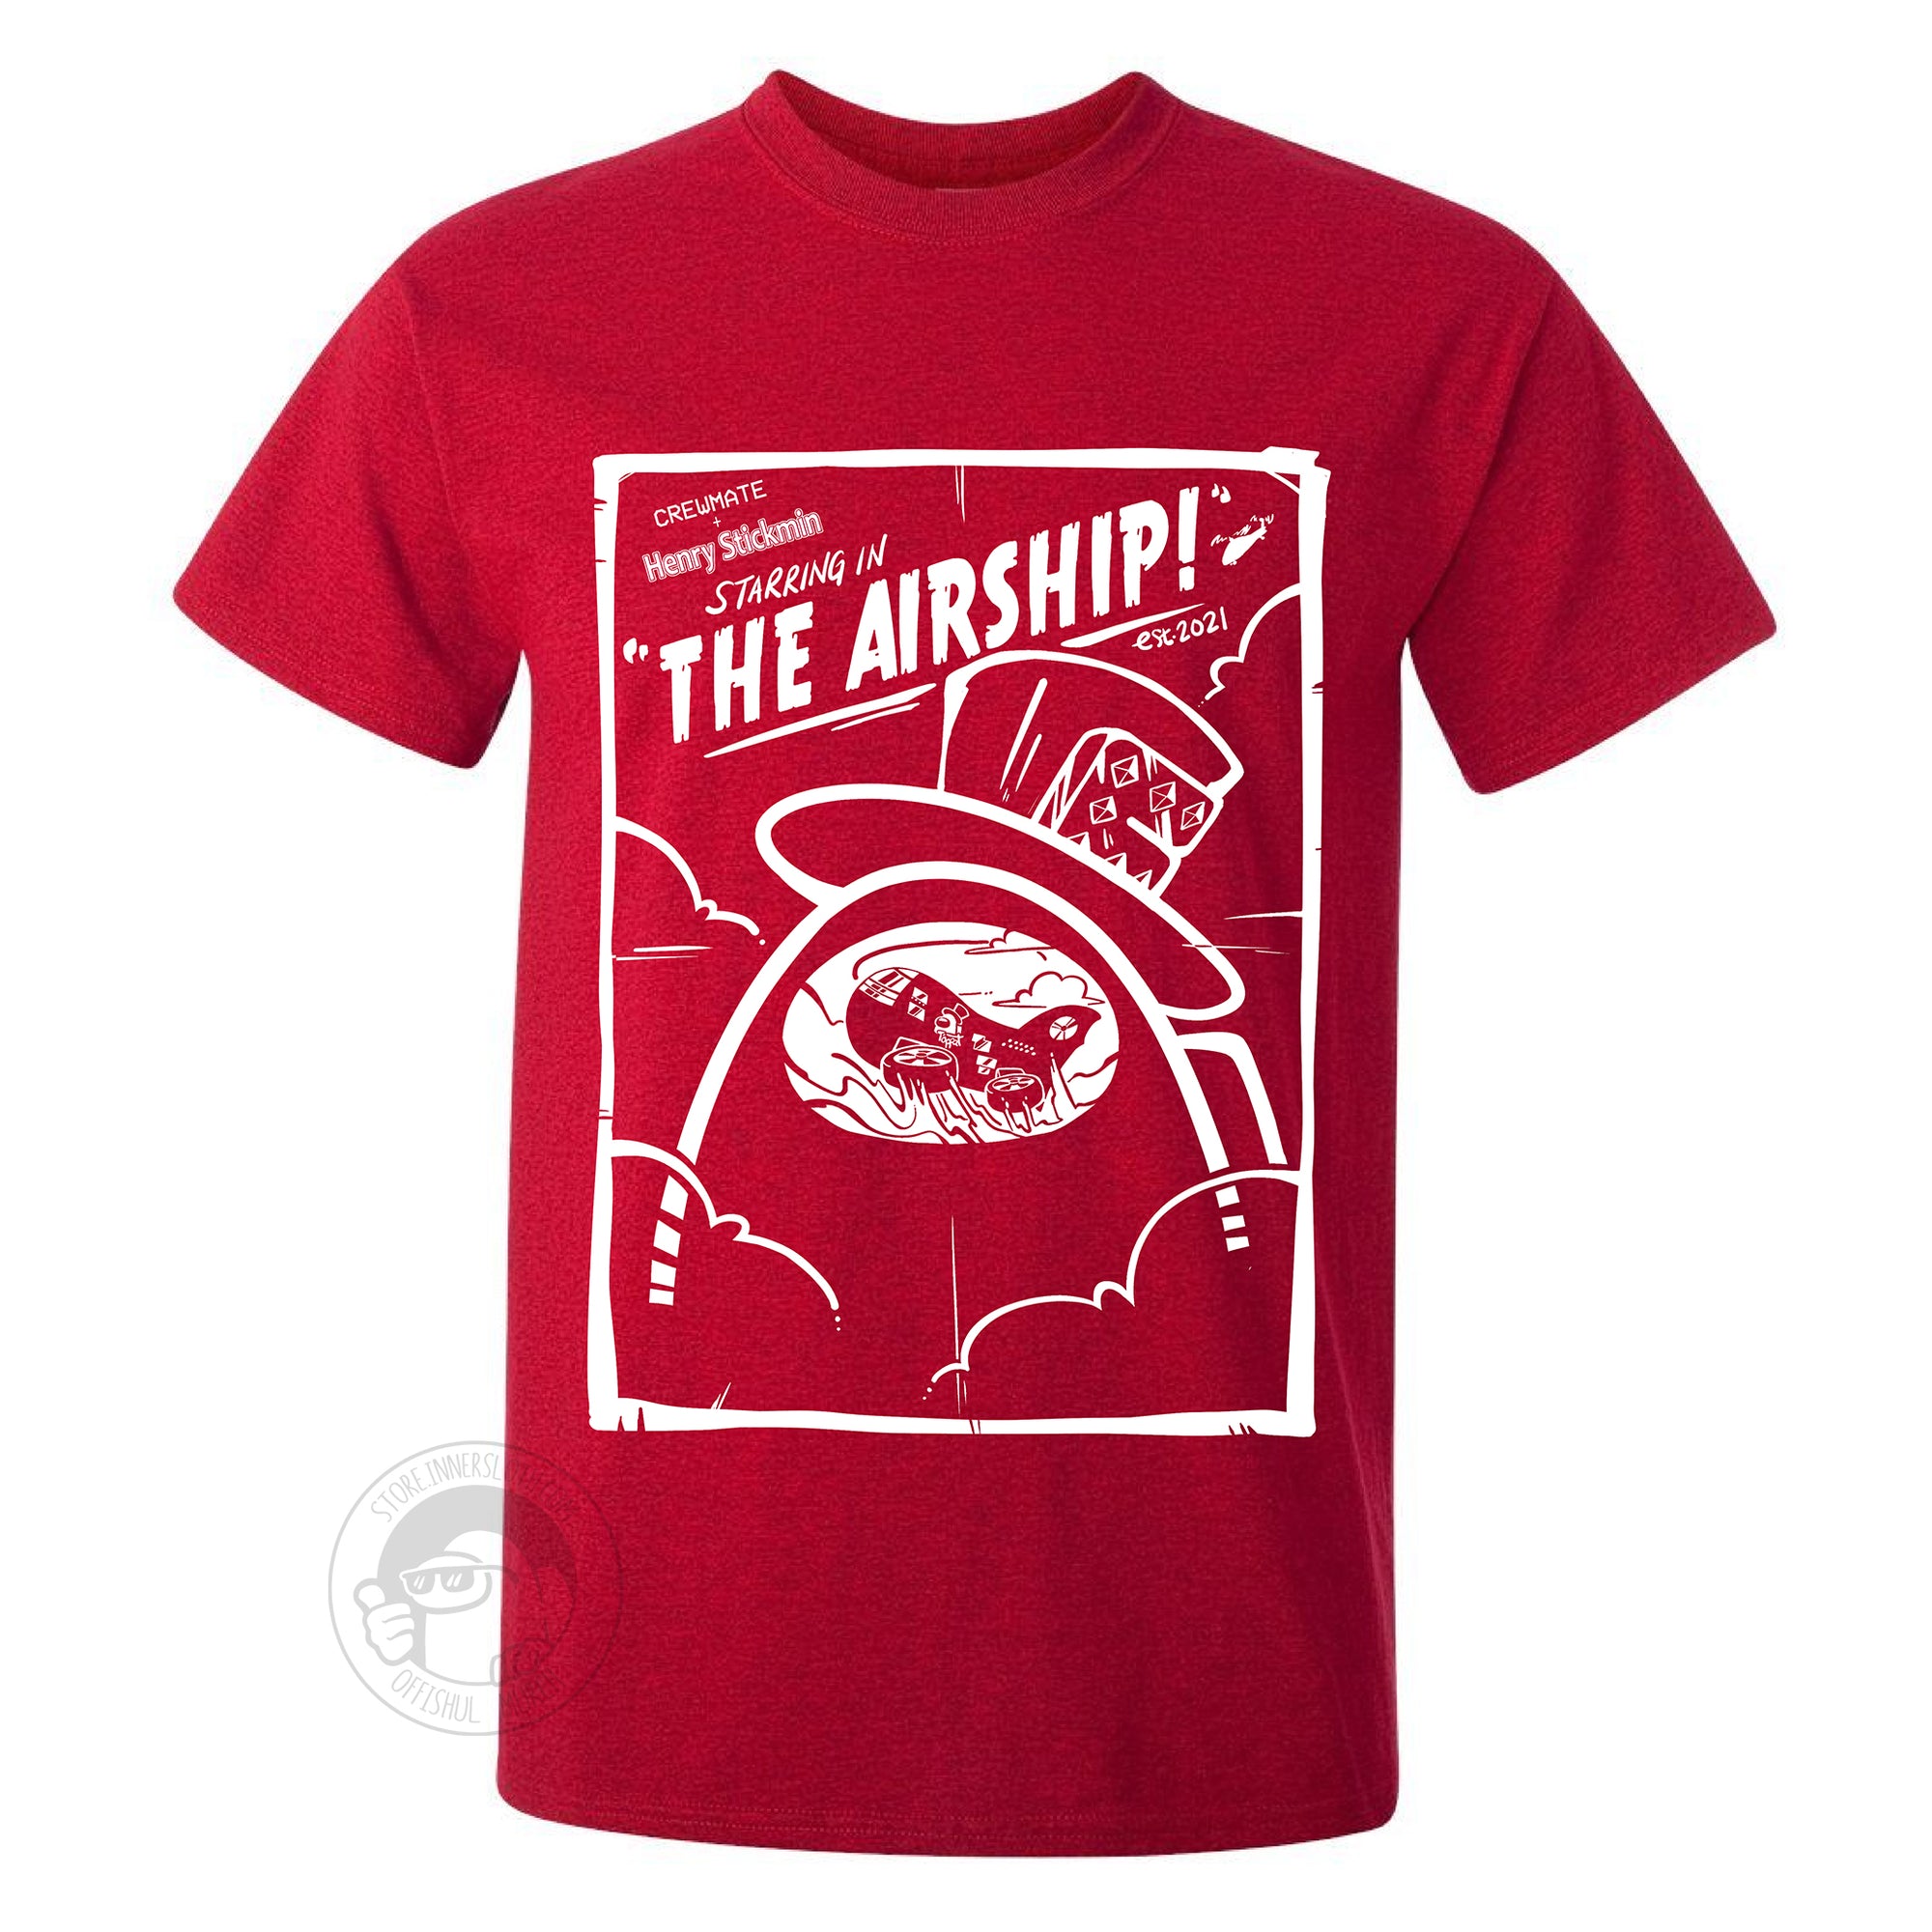  A product photo of the Among Us: The Airship shirt. The t-shirt is red with a printed white design of a mock movie poster advertising “Henry Stickmin, Starring in ‘The Airship!’” A large crewmate in a top hat has the airship reflected in its visor.